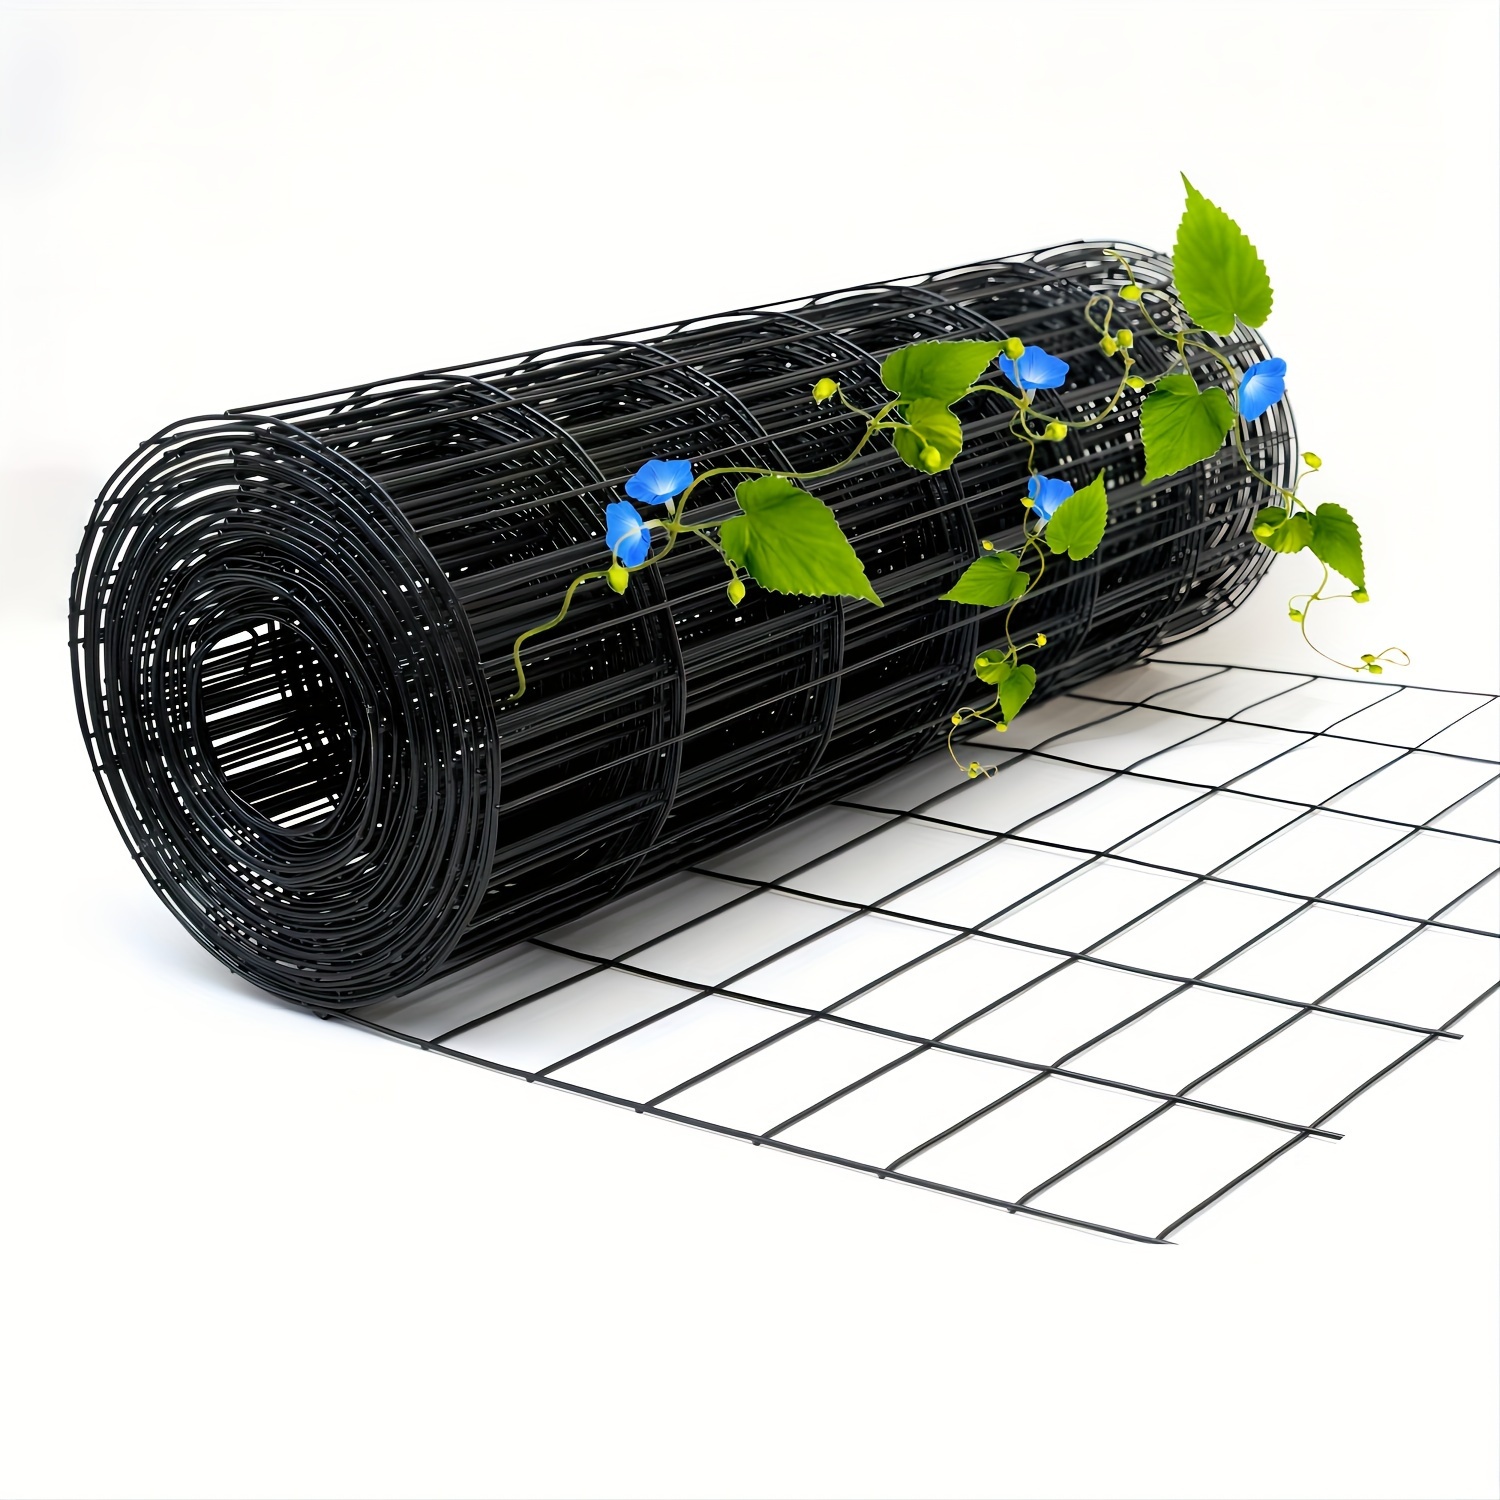 

Hittite Black Pvc Coated Welded Wire Fencing, 2 Inch X 3inch 16 Ga Welded Wire Fence Rolls, Black Metal Garden Fence Wire Roll Garden Border Fencing For Yard Vegetable Plant Protection